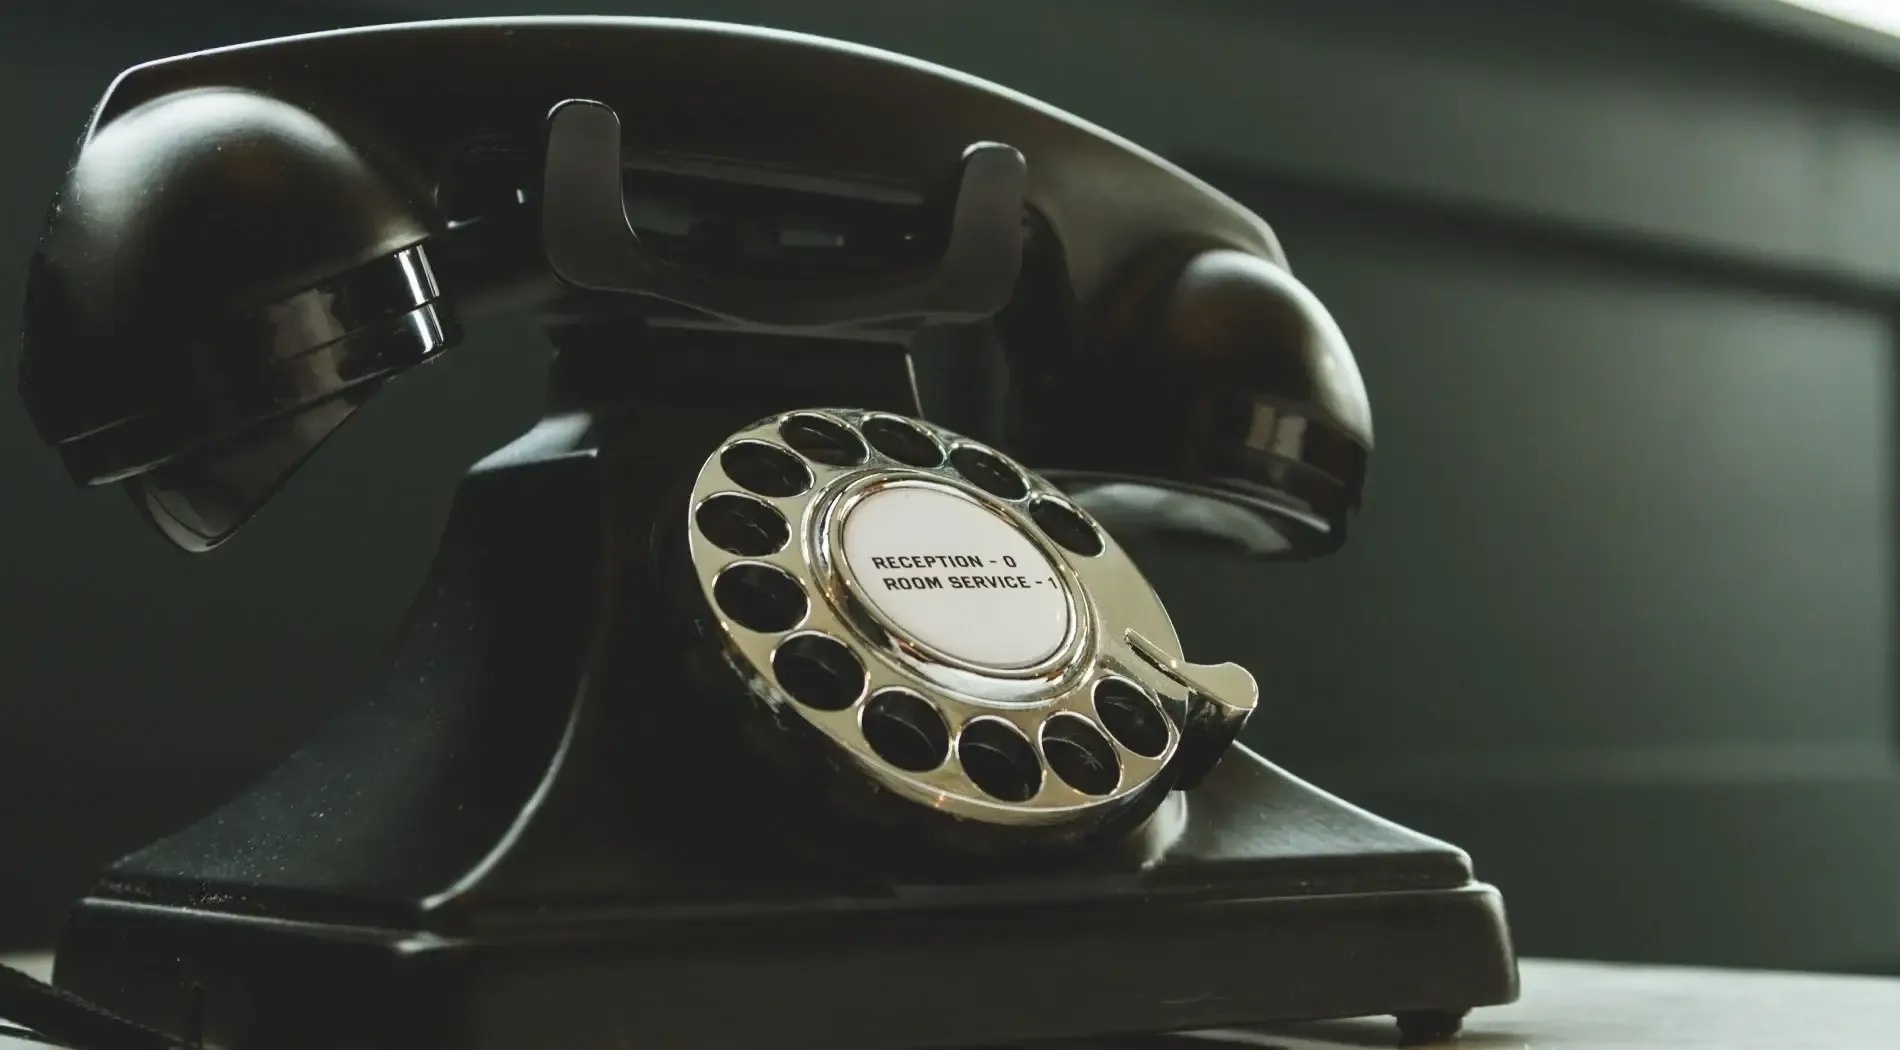 a black telephone with the words reception room service on it